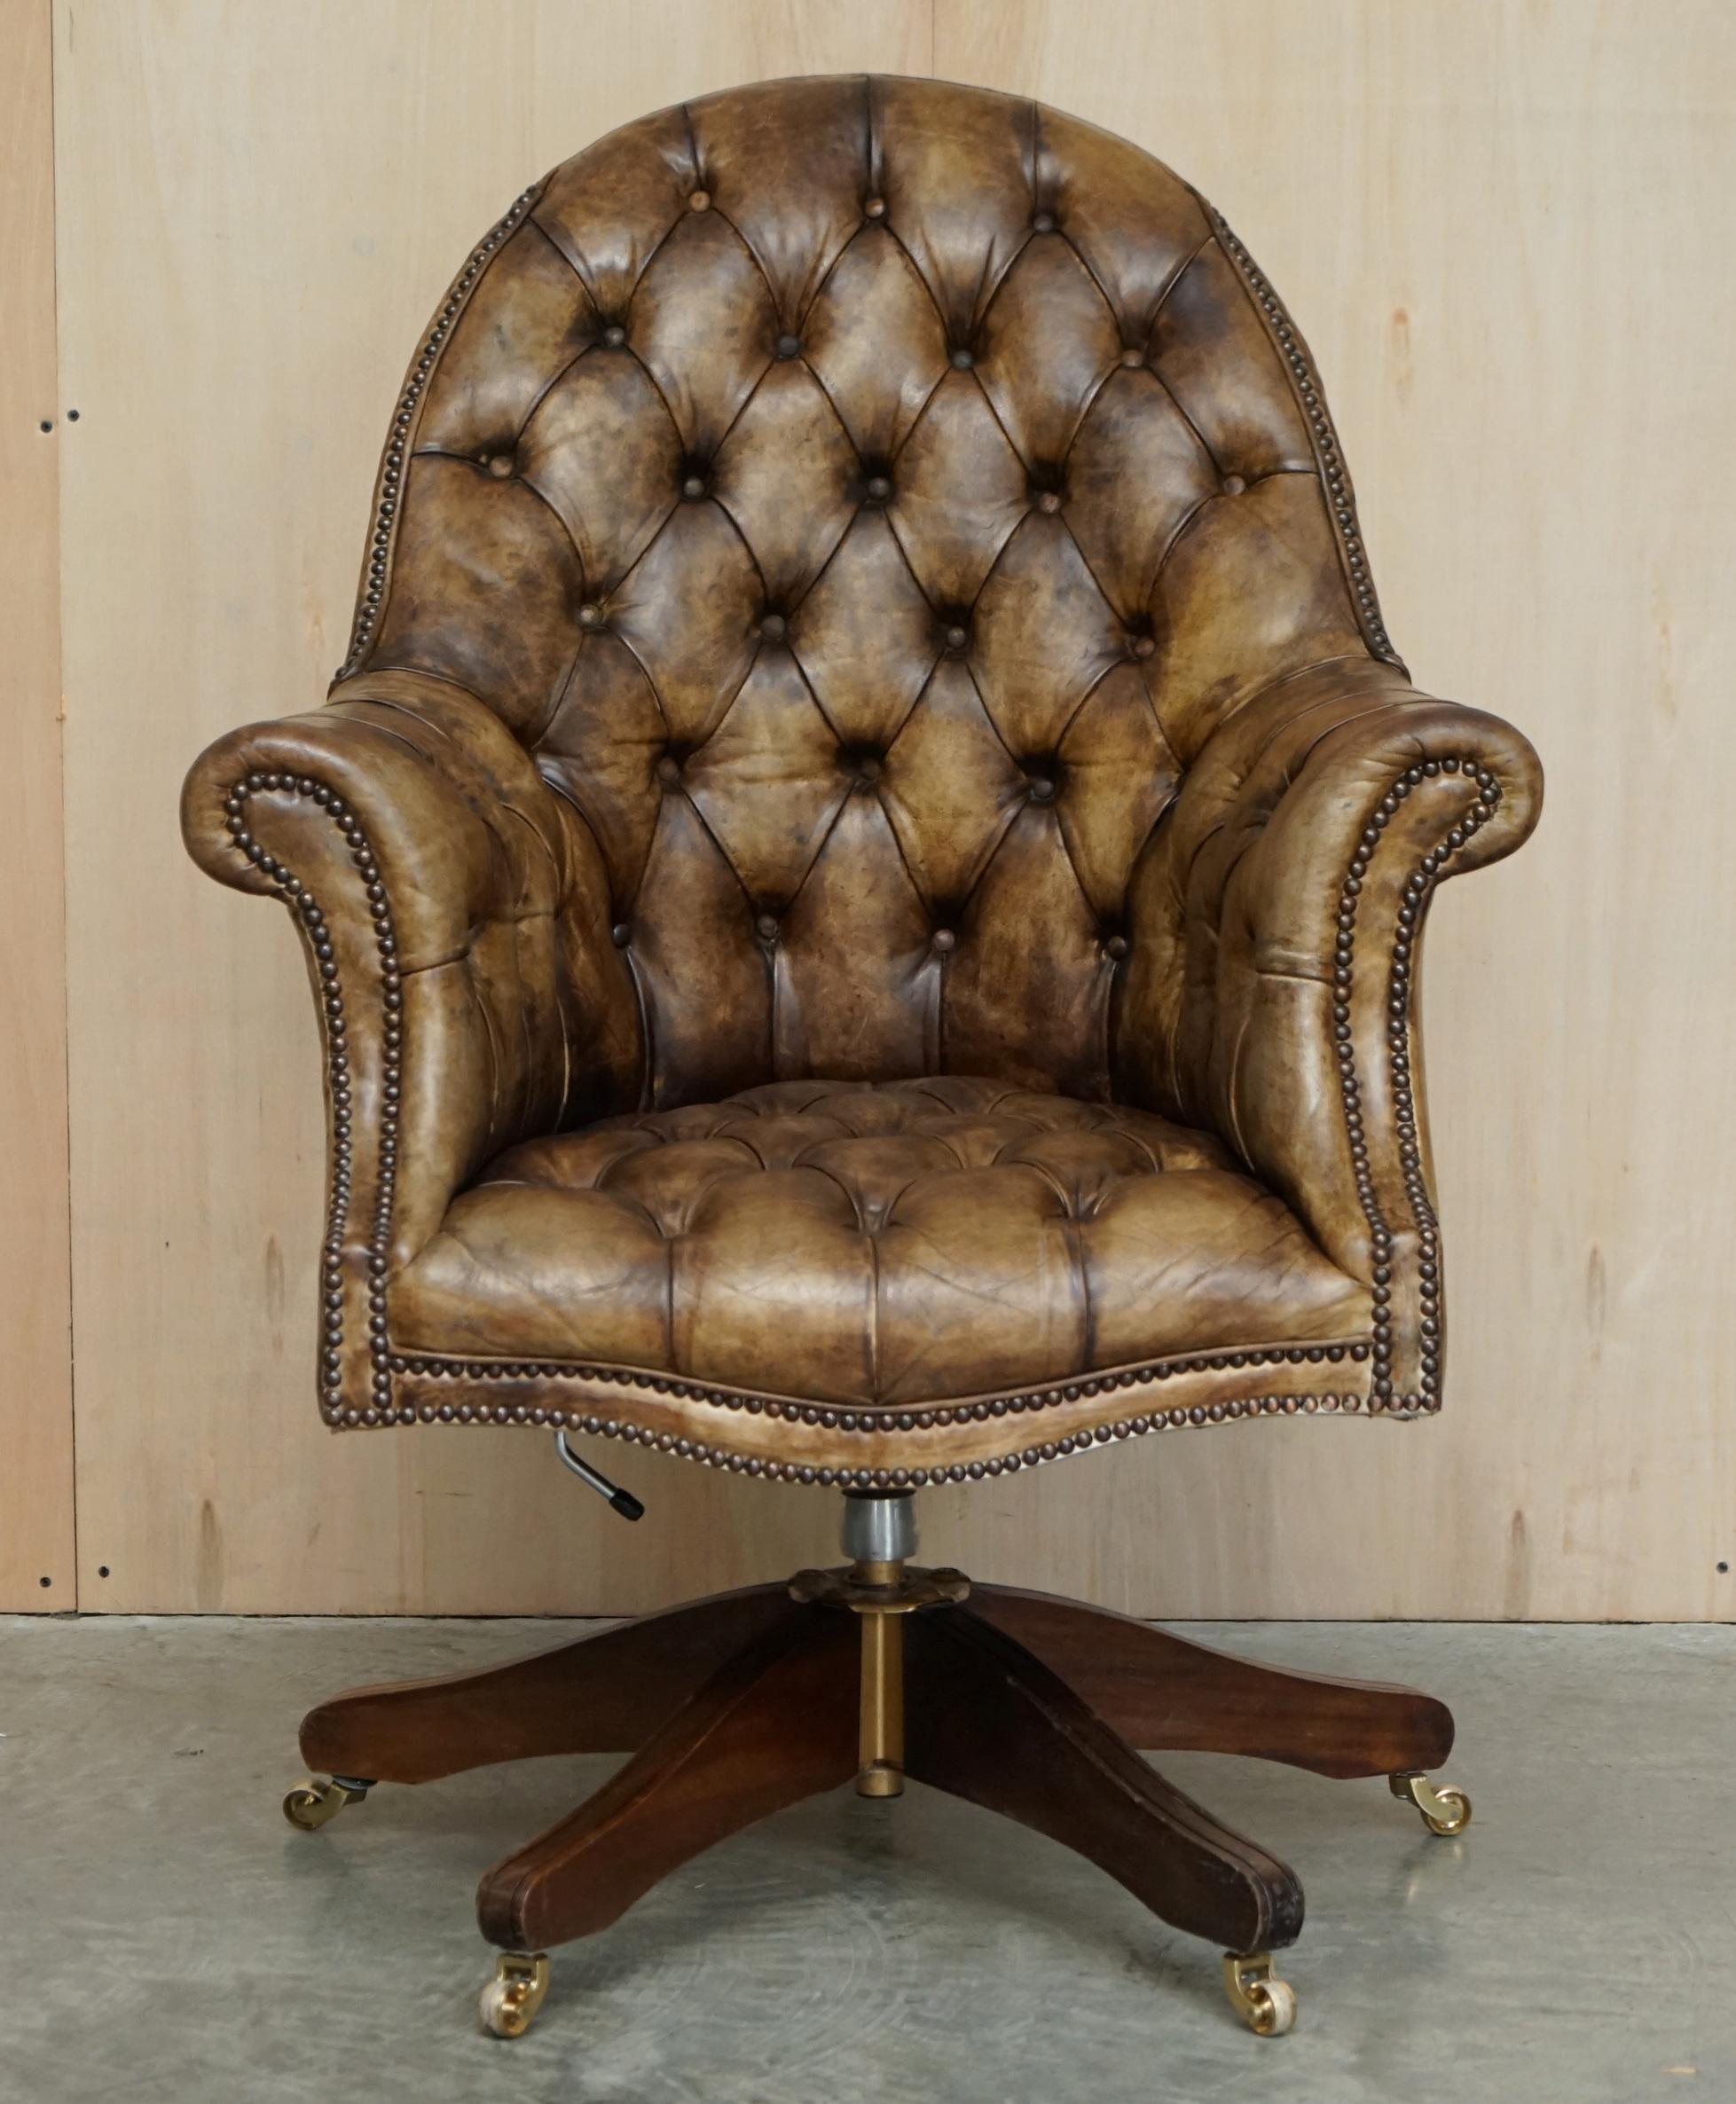 We are delighted to offer for sale this lovely, lightly restored original leather hide, vintage hand dyed Mahogany brown leather Chesterfield tufted director’s chair.

A very good looking well made and comfortable director’s chair. Its